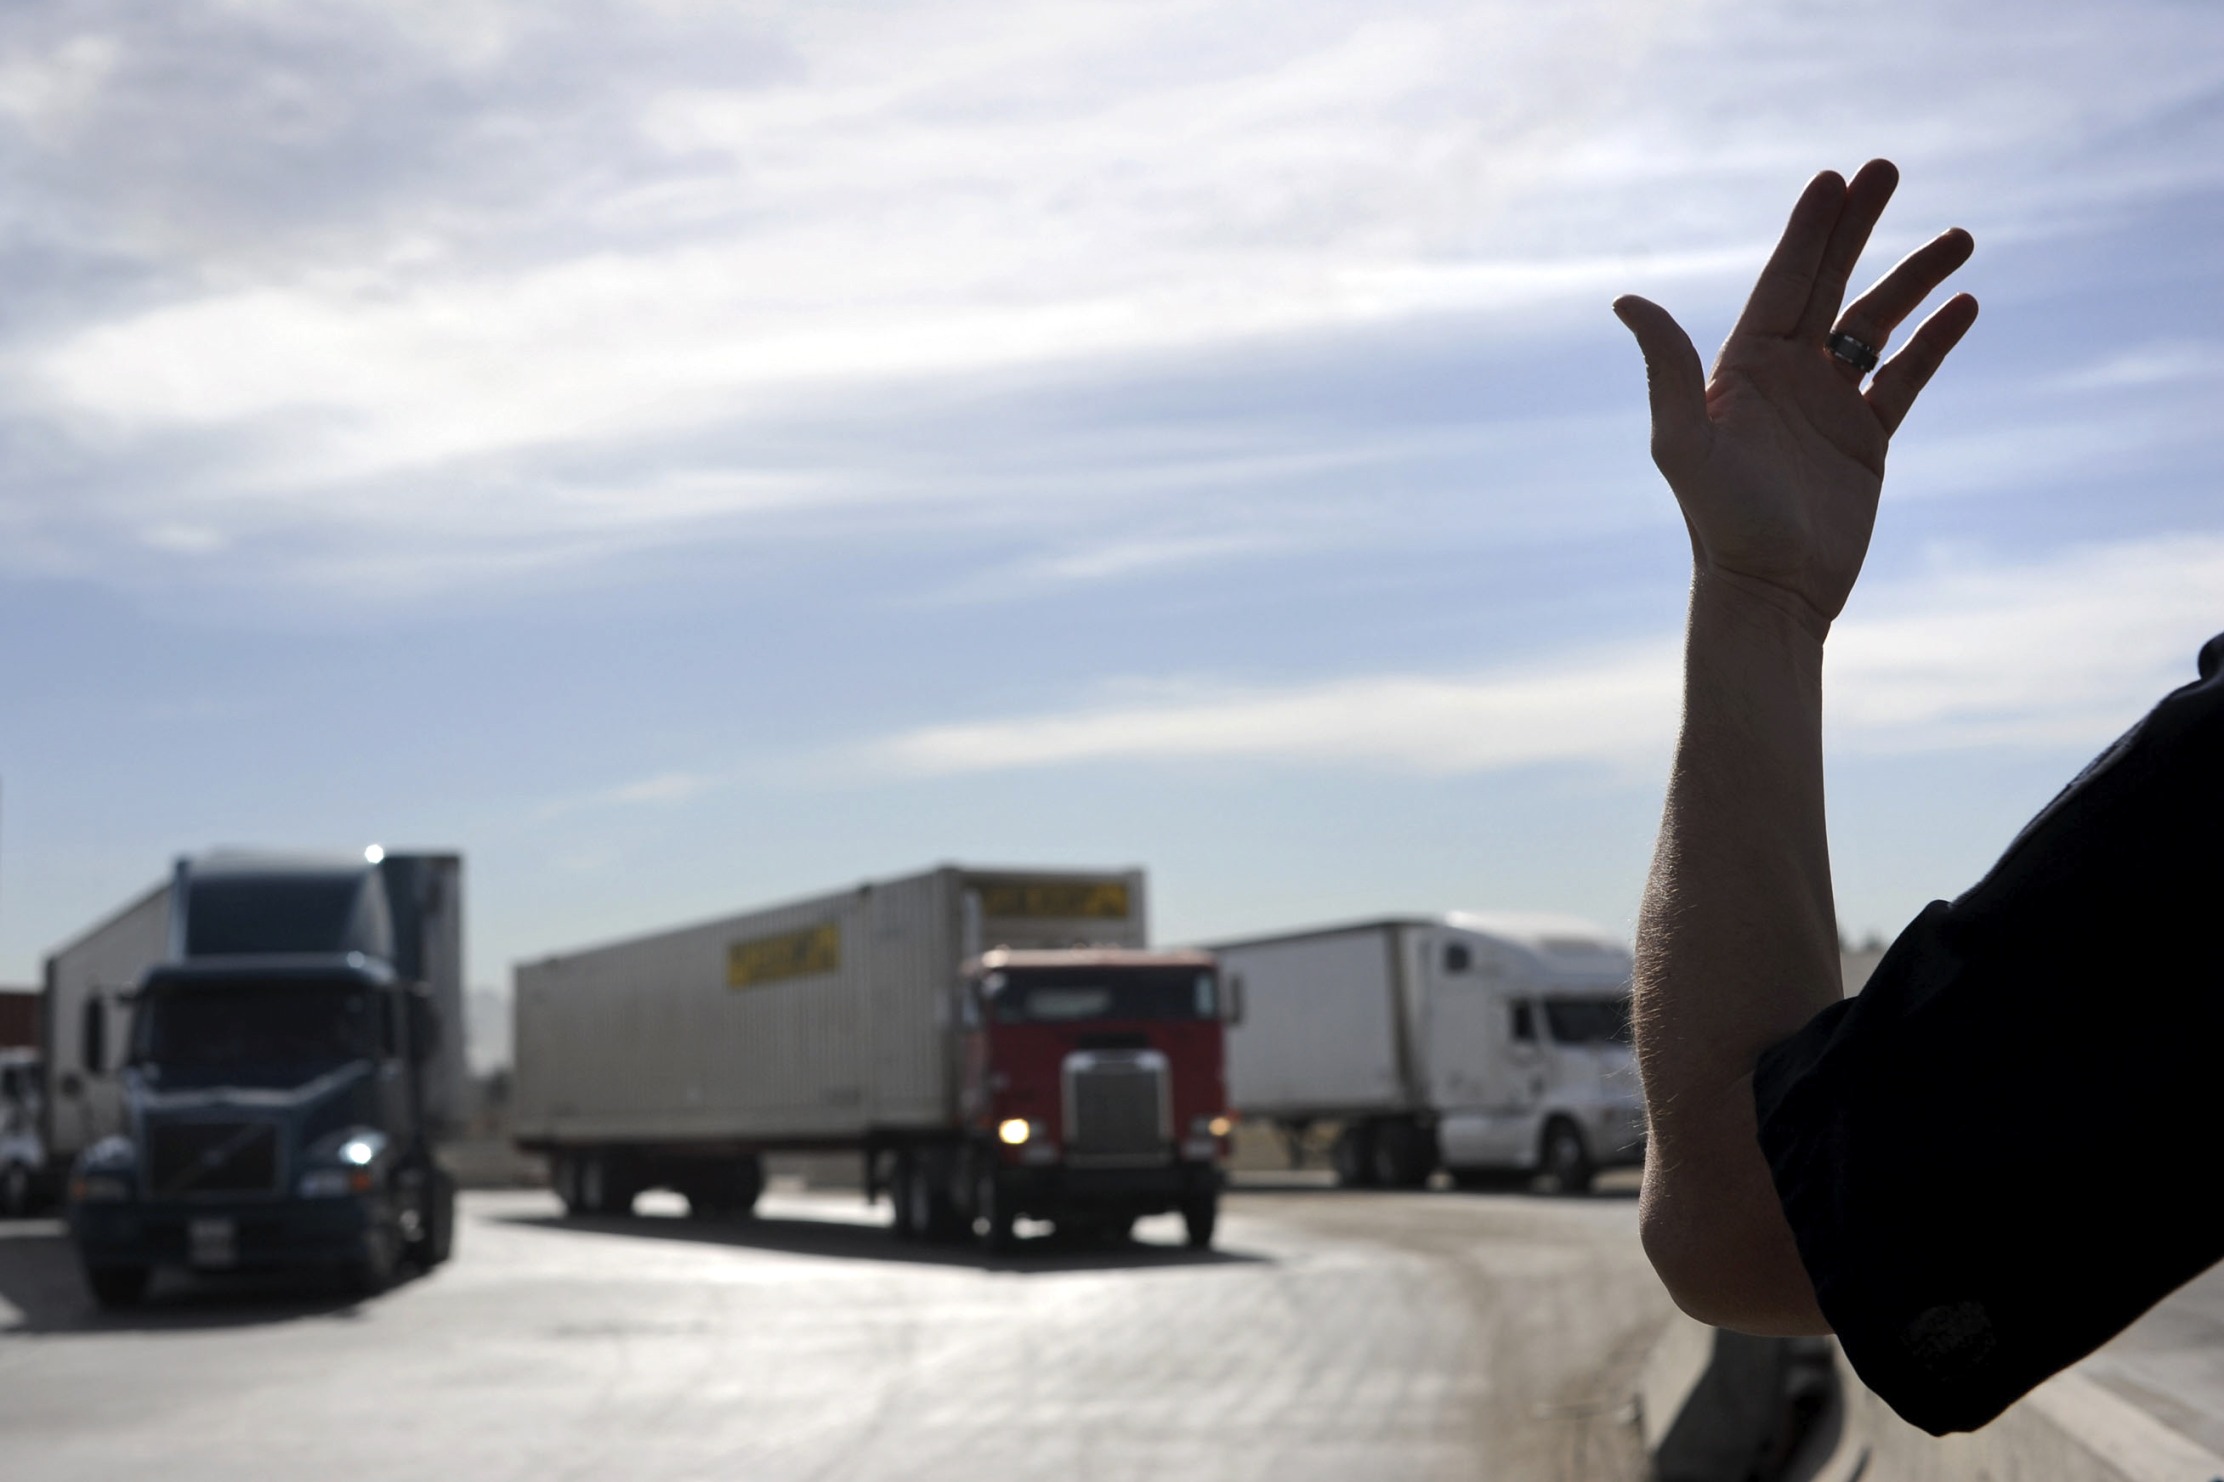 A U.S. Customs and Border Protection officer directs trucks entering the United States from Mexico&nbsp;in San Diego, California.